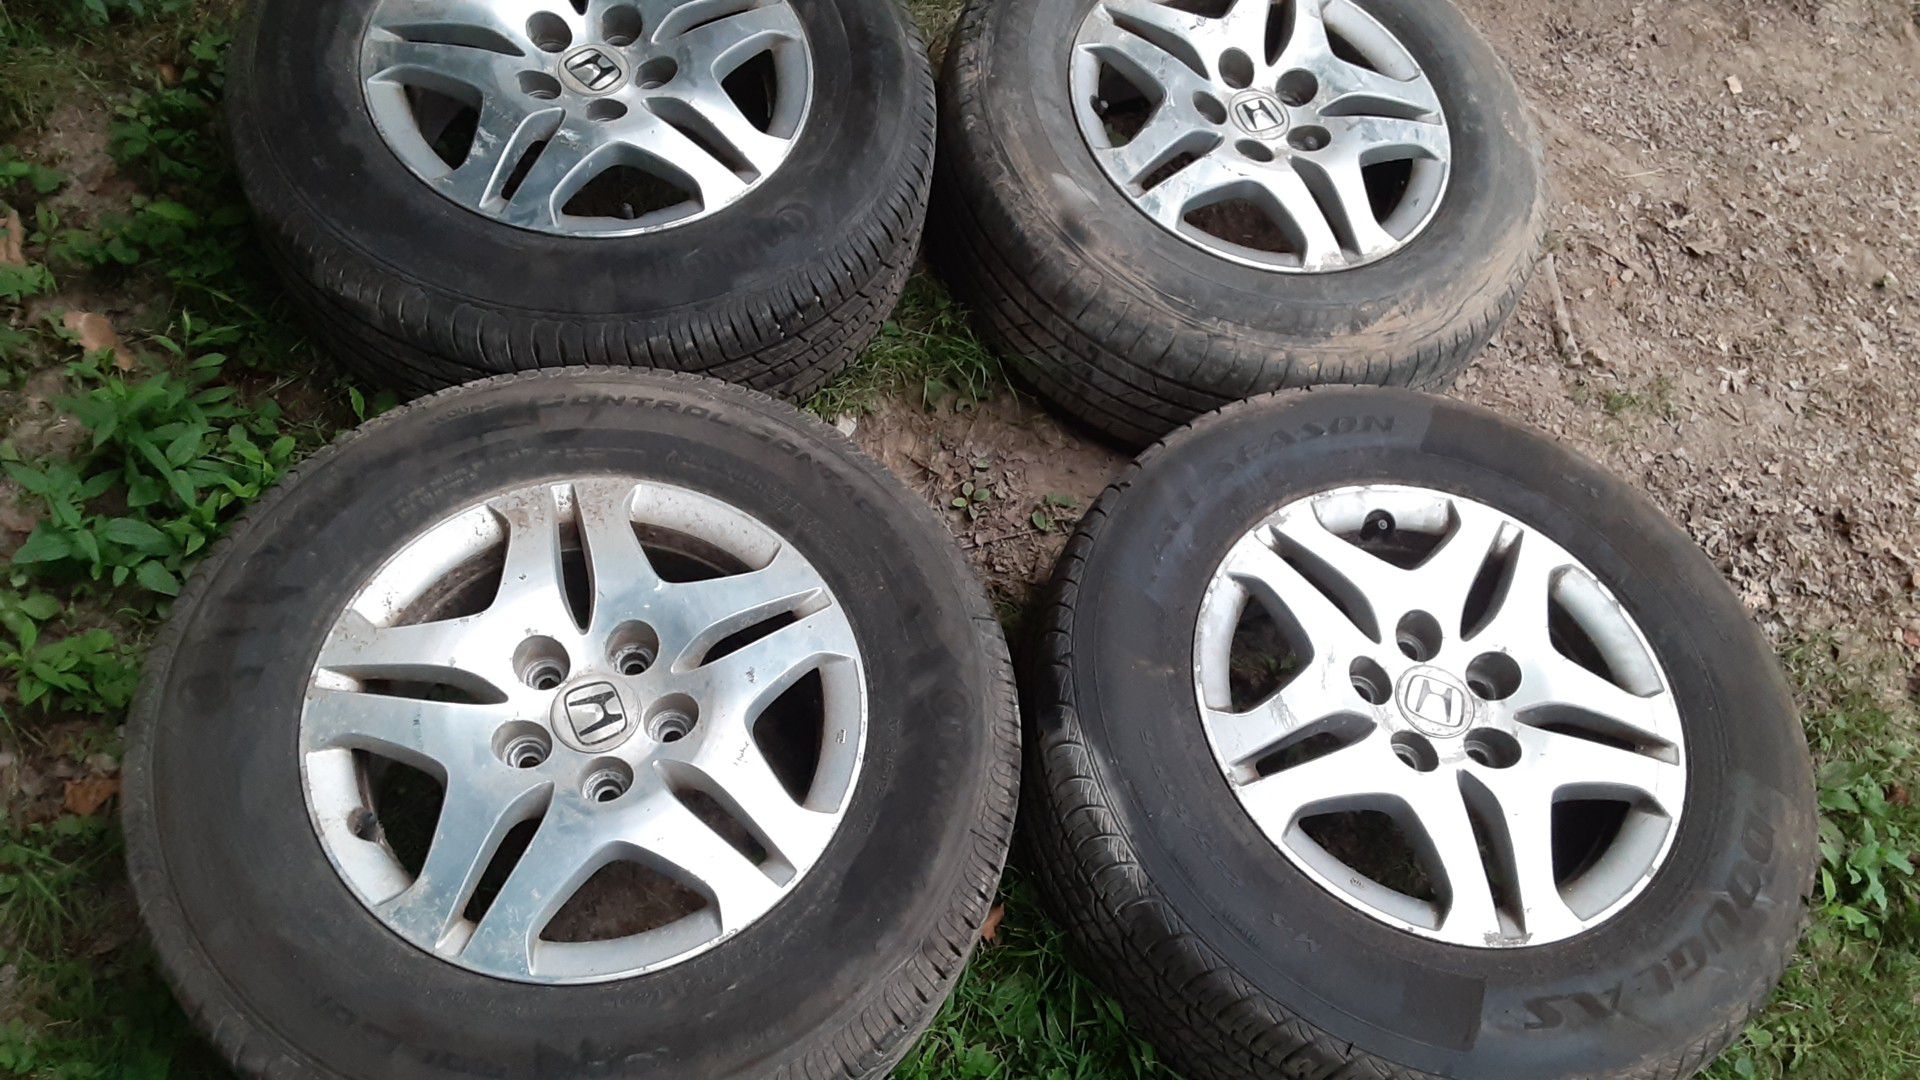 235 65 16 tires on 2006 honda odyssey wheels. Good set of 4 rims and tires